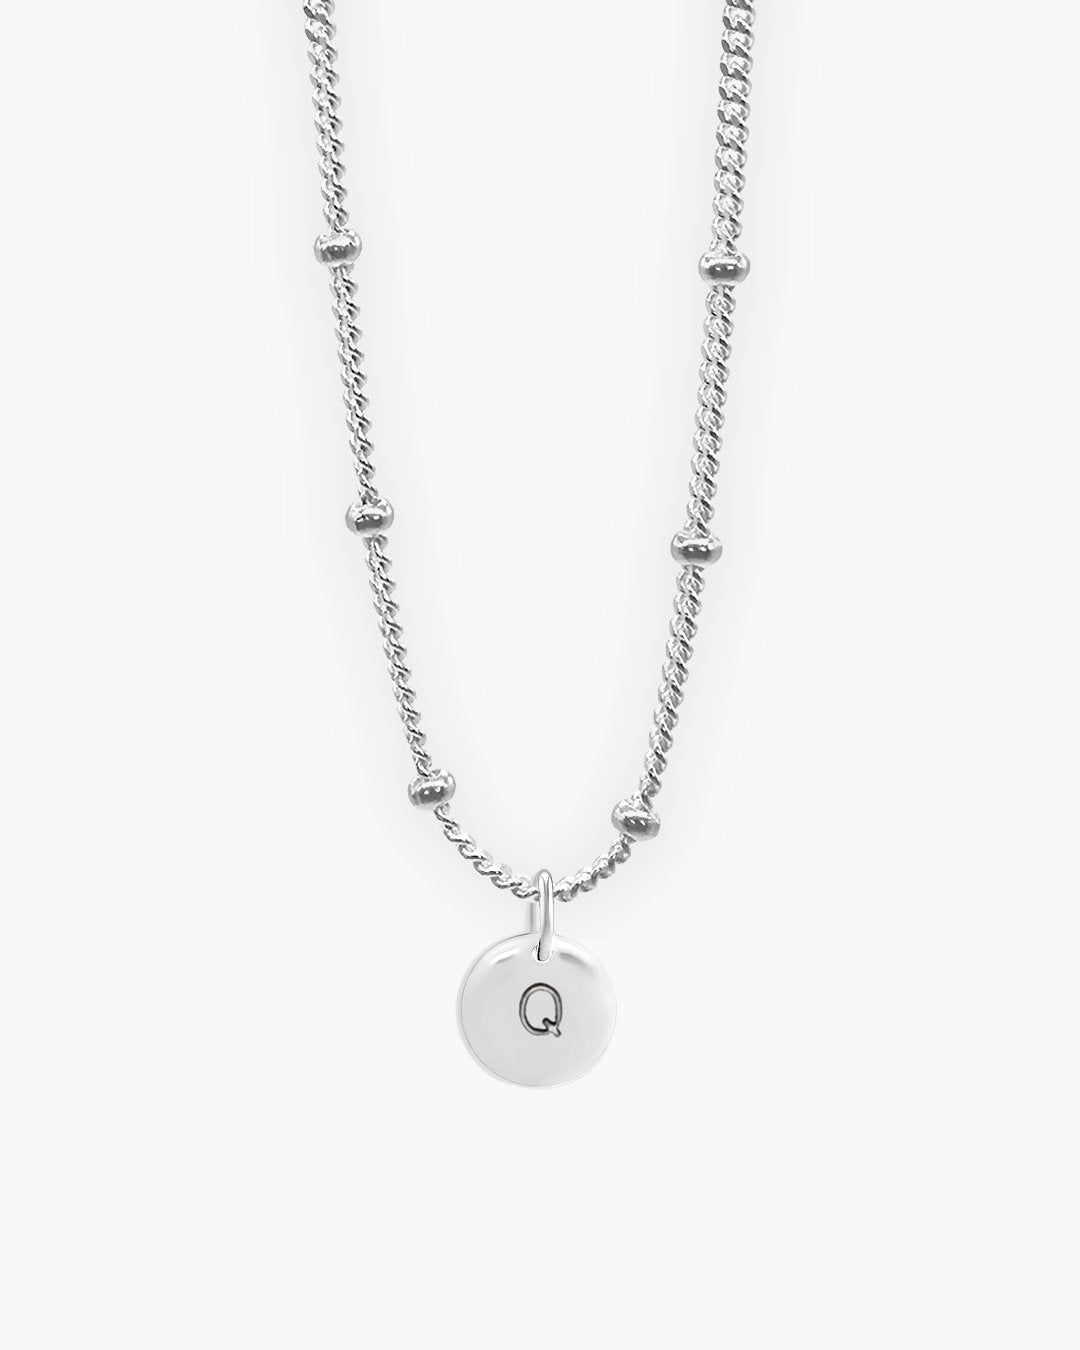 Silver Round Love Letter Q Necklace